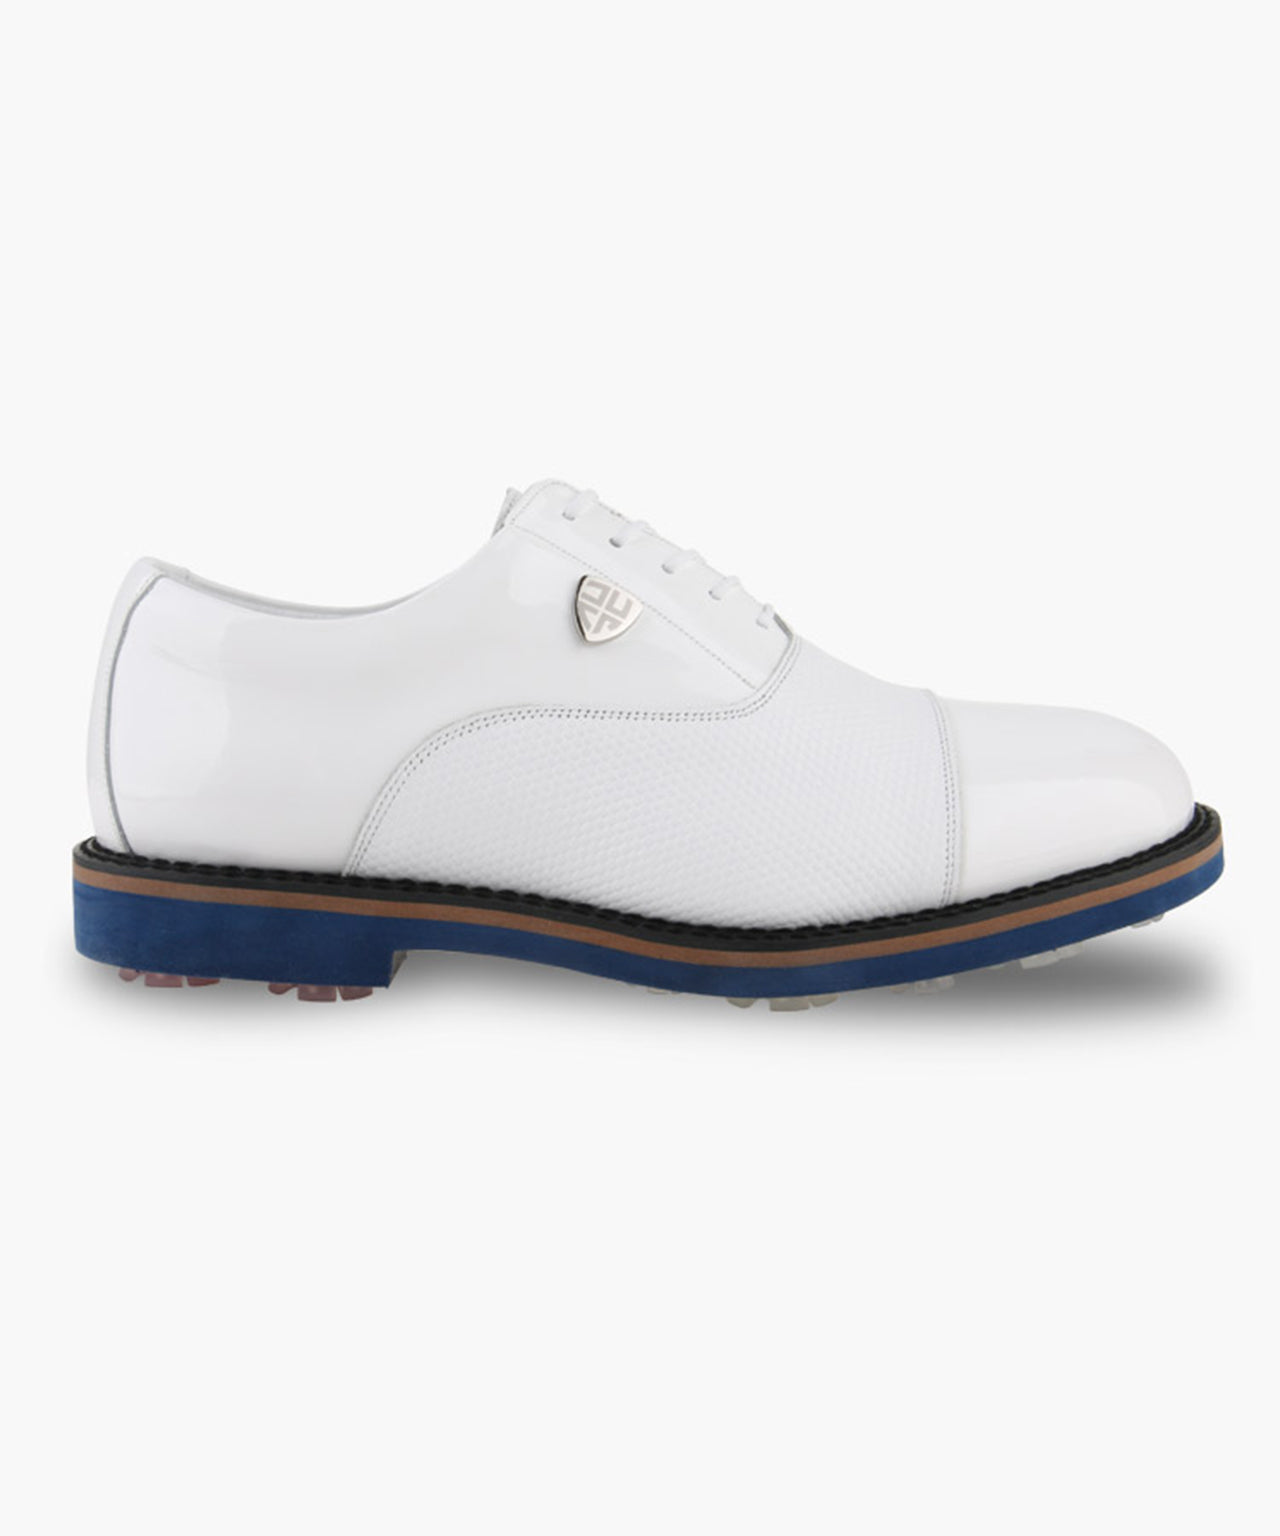 HENRY STUART Icon Spikeless Golf Shoes - White